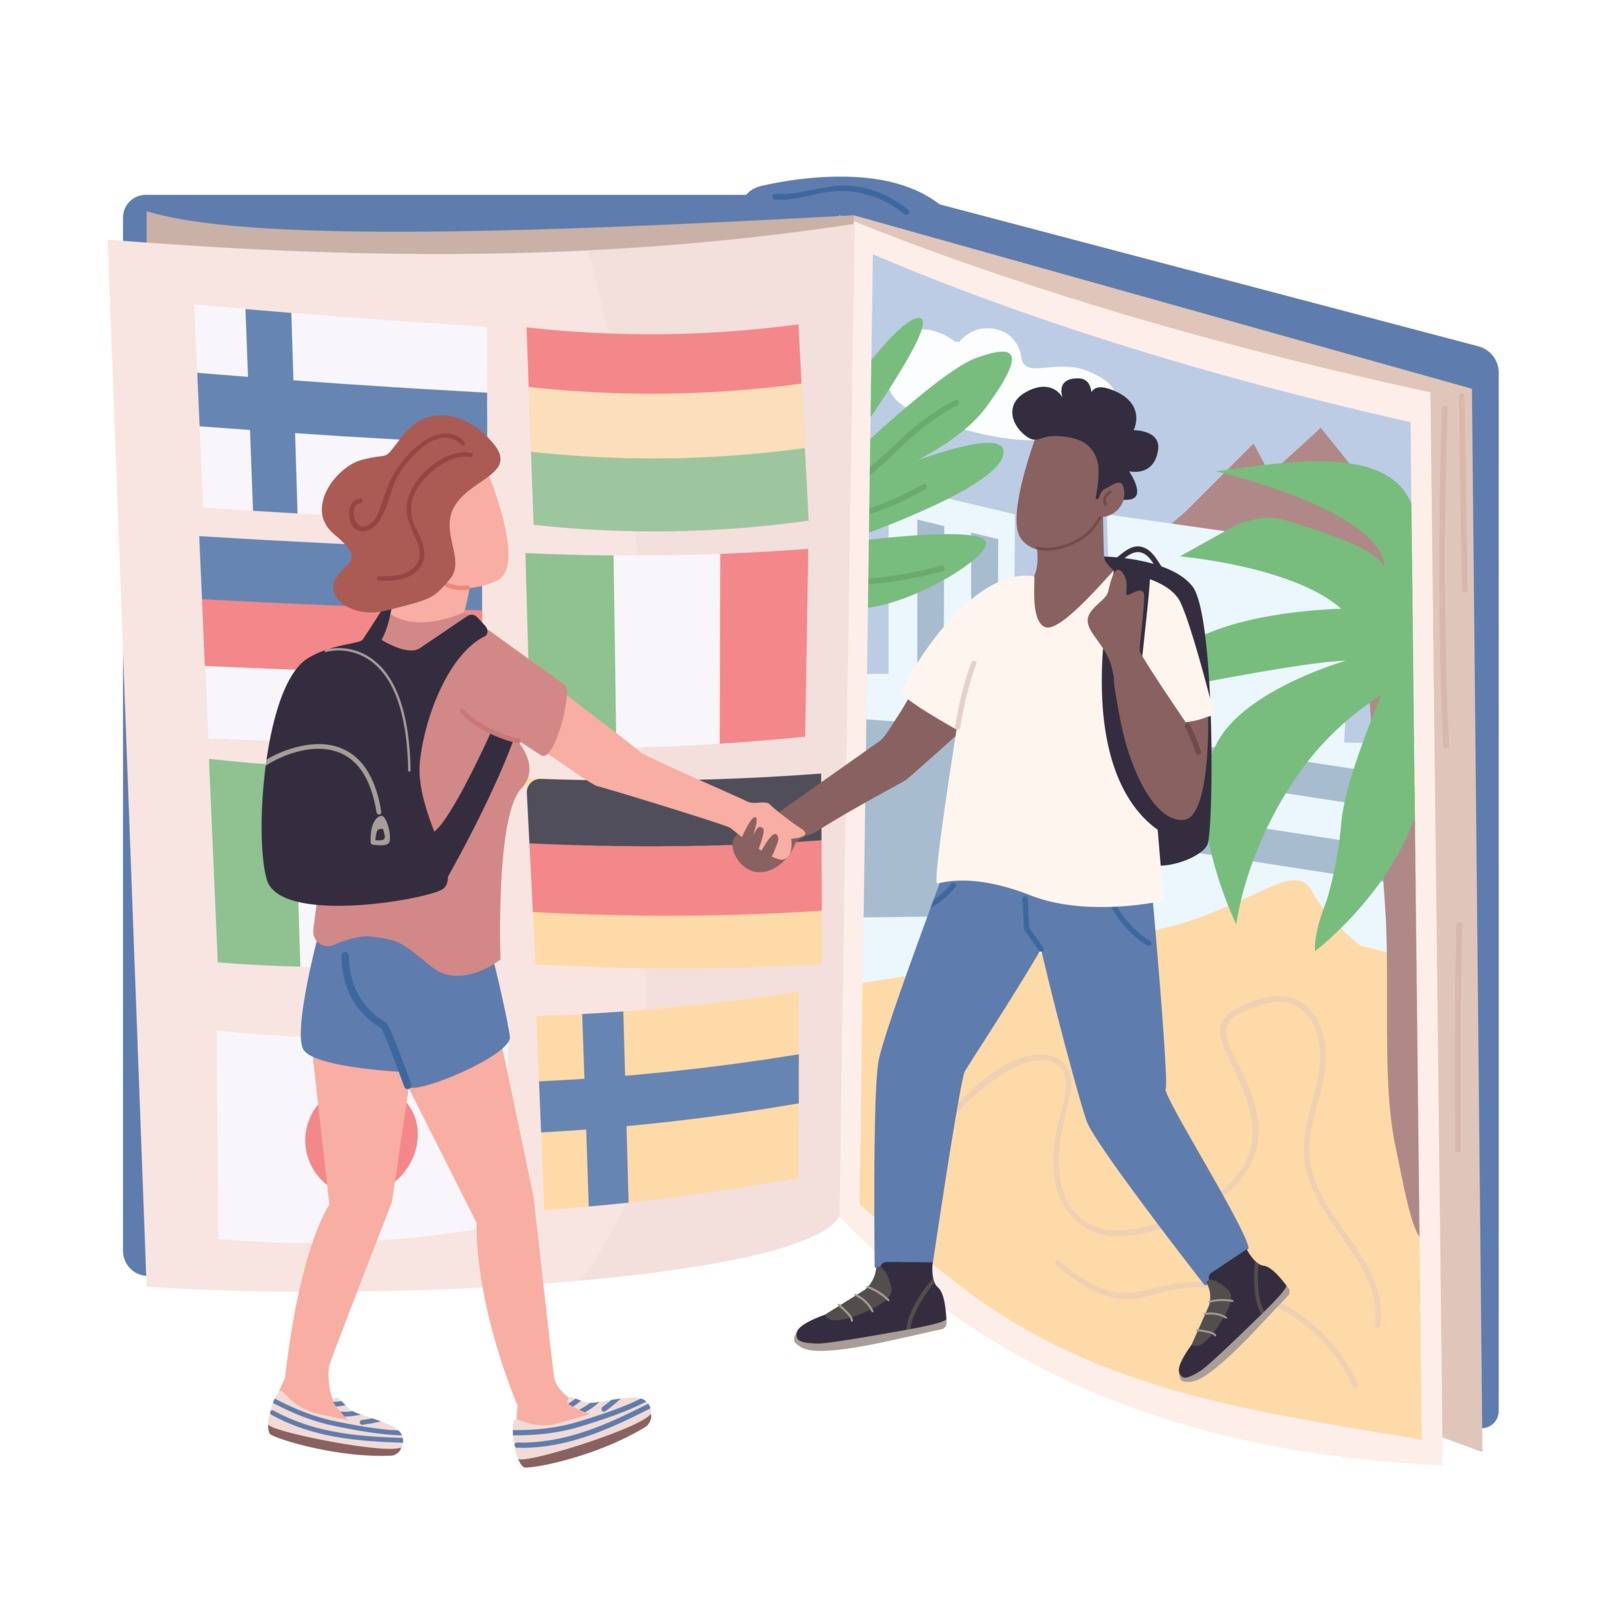 Student exchange program flat concept vector illustration. Caucasian girl and african american boy, university pupils 2D cartoon characters for web design. Education abroad experience creative idea